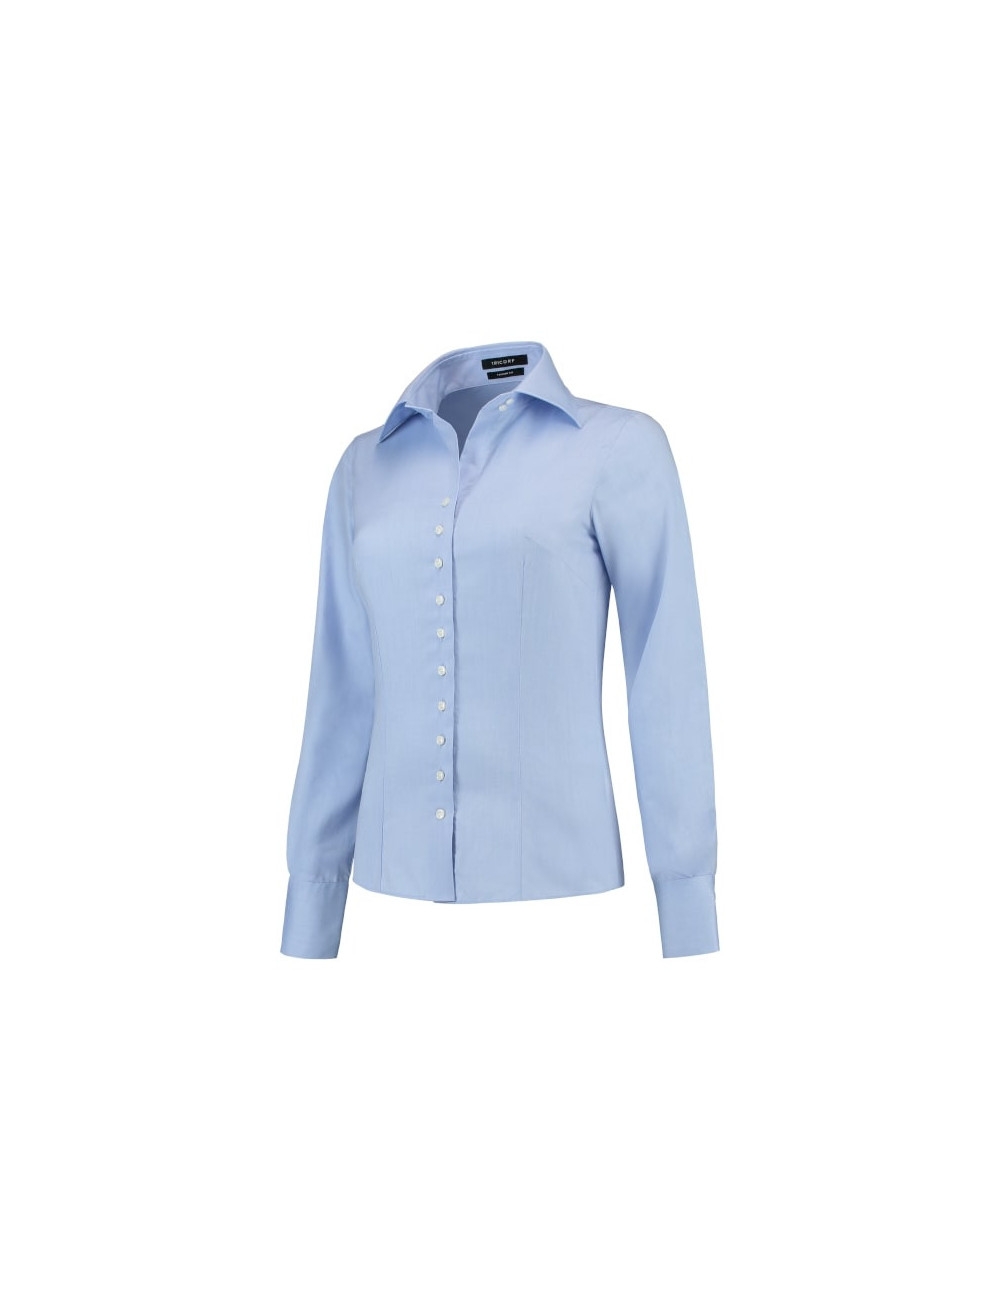 Fitted blouse t22 blue women`s shirt Adler Tricorp